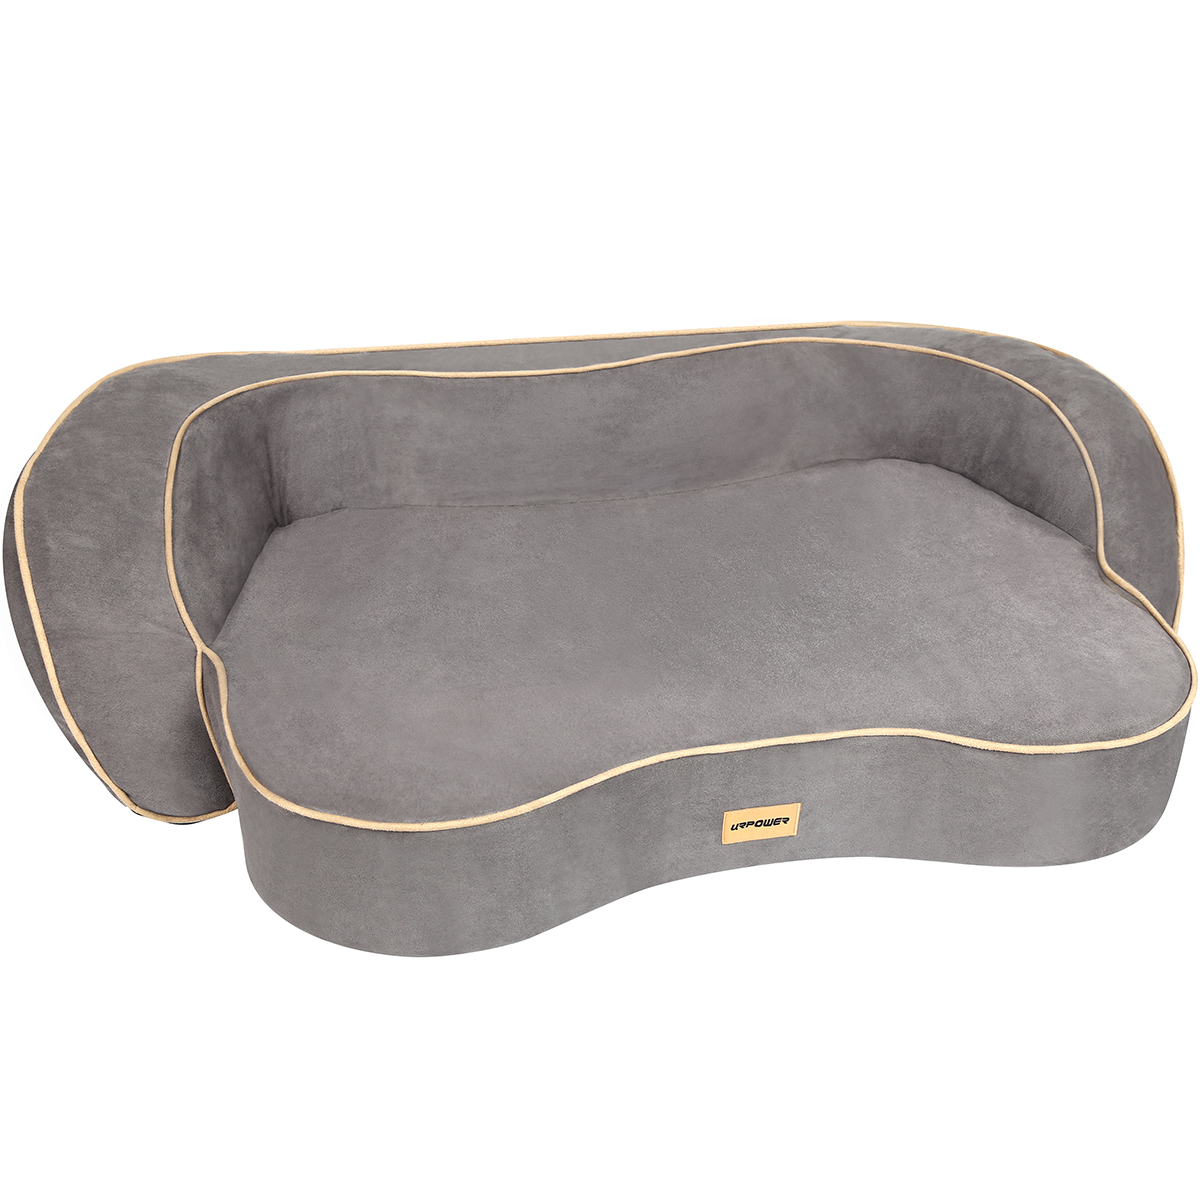 URPOWER Orthopedic Memory Foam Pet Bed with Washable Cover & Water-Resistant Inner Liner Padded Rim Dog Beds